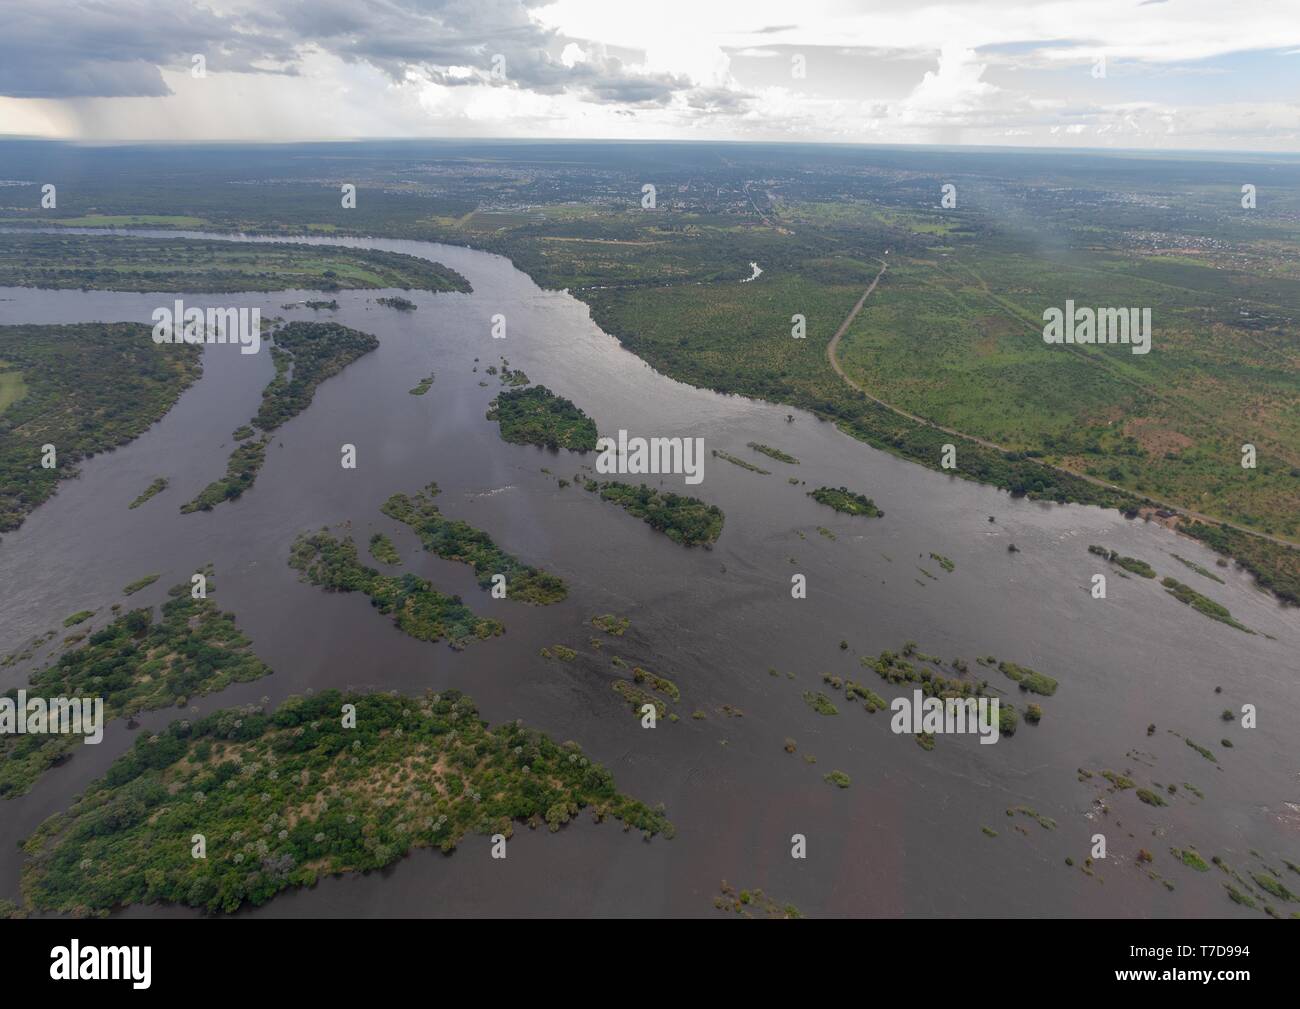 Aerial picture of the sambesi river short before the famous Victoria Falls in Zimbabwe Stock Photo